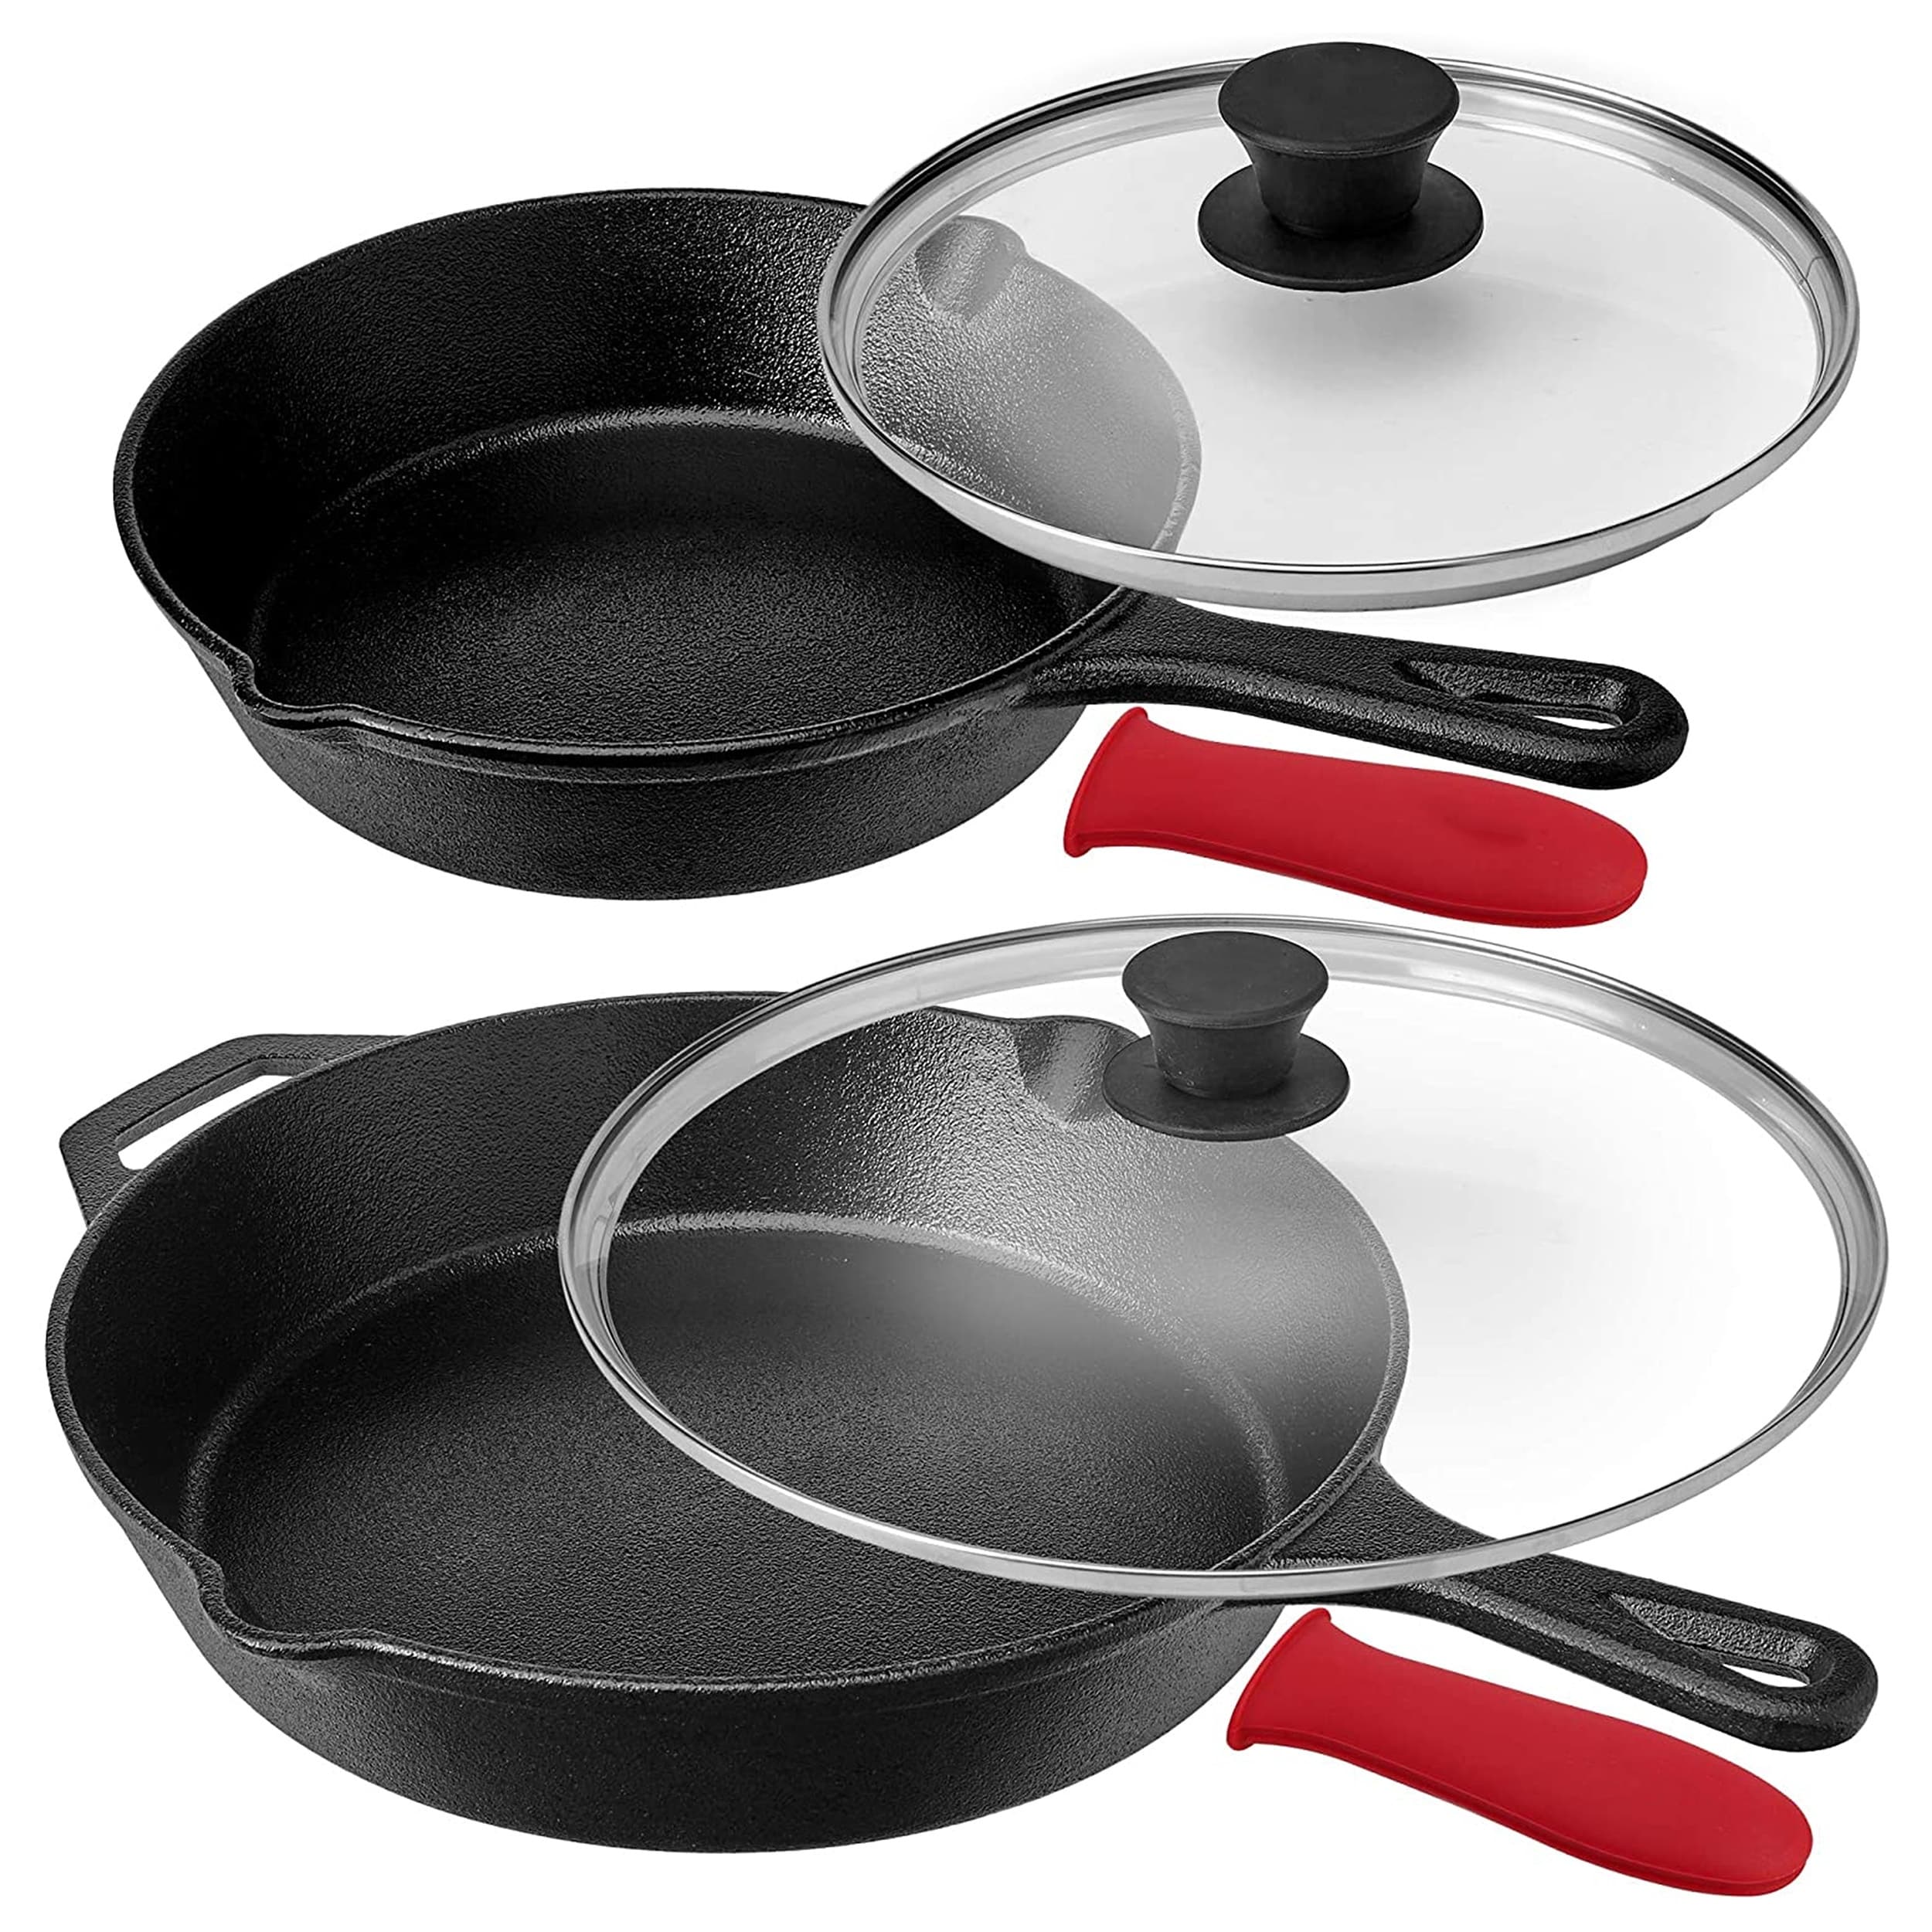 The Lodge Pre-Seasoned Cast Iron 5-Piece Cookware Set Is 40% Off